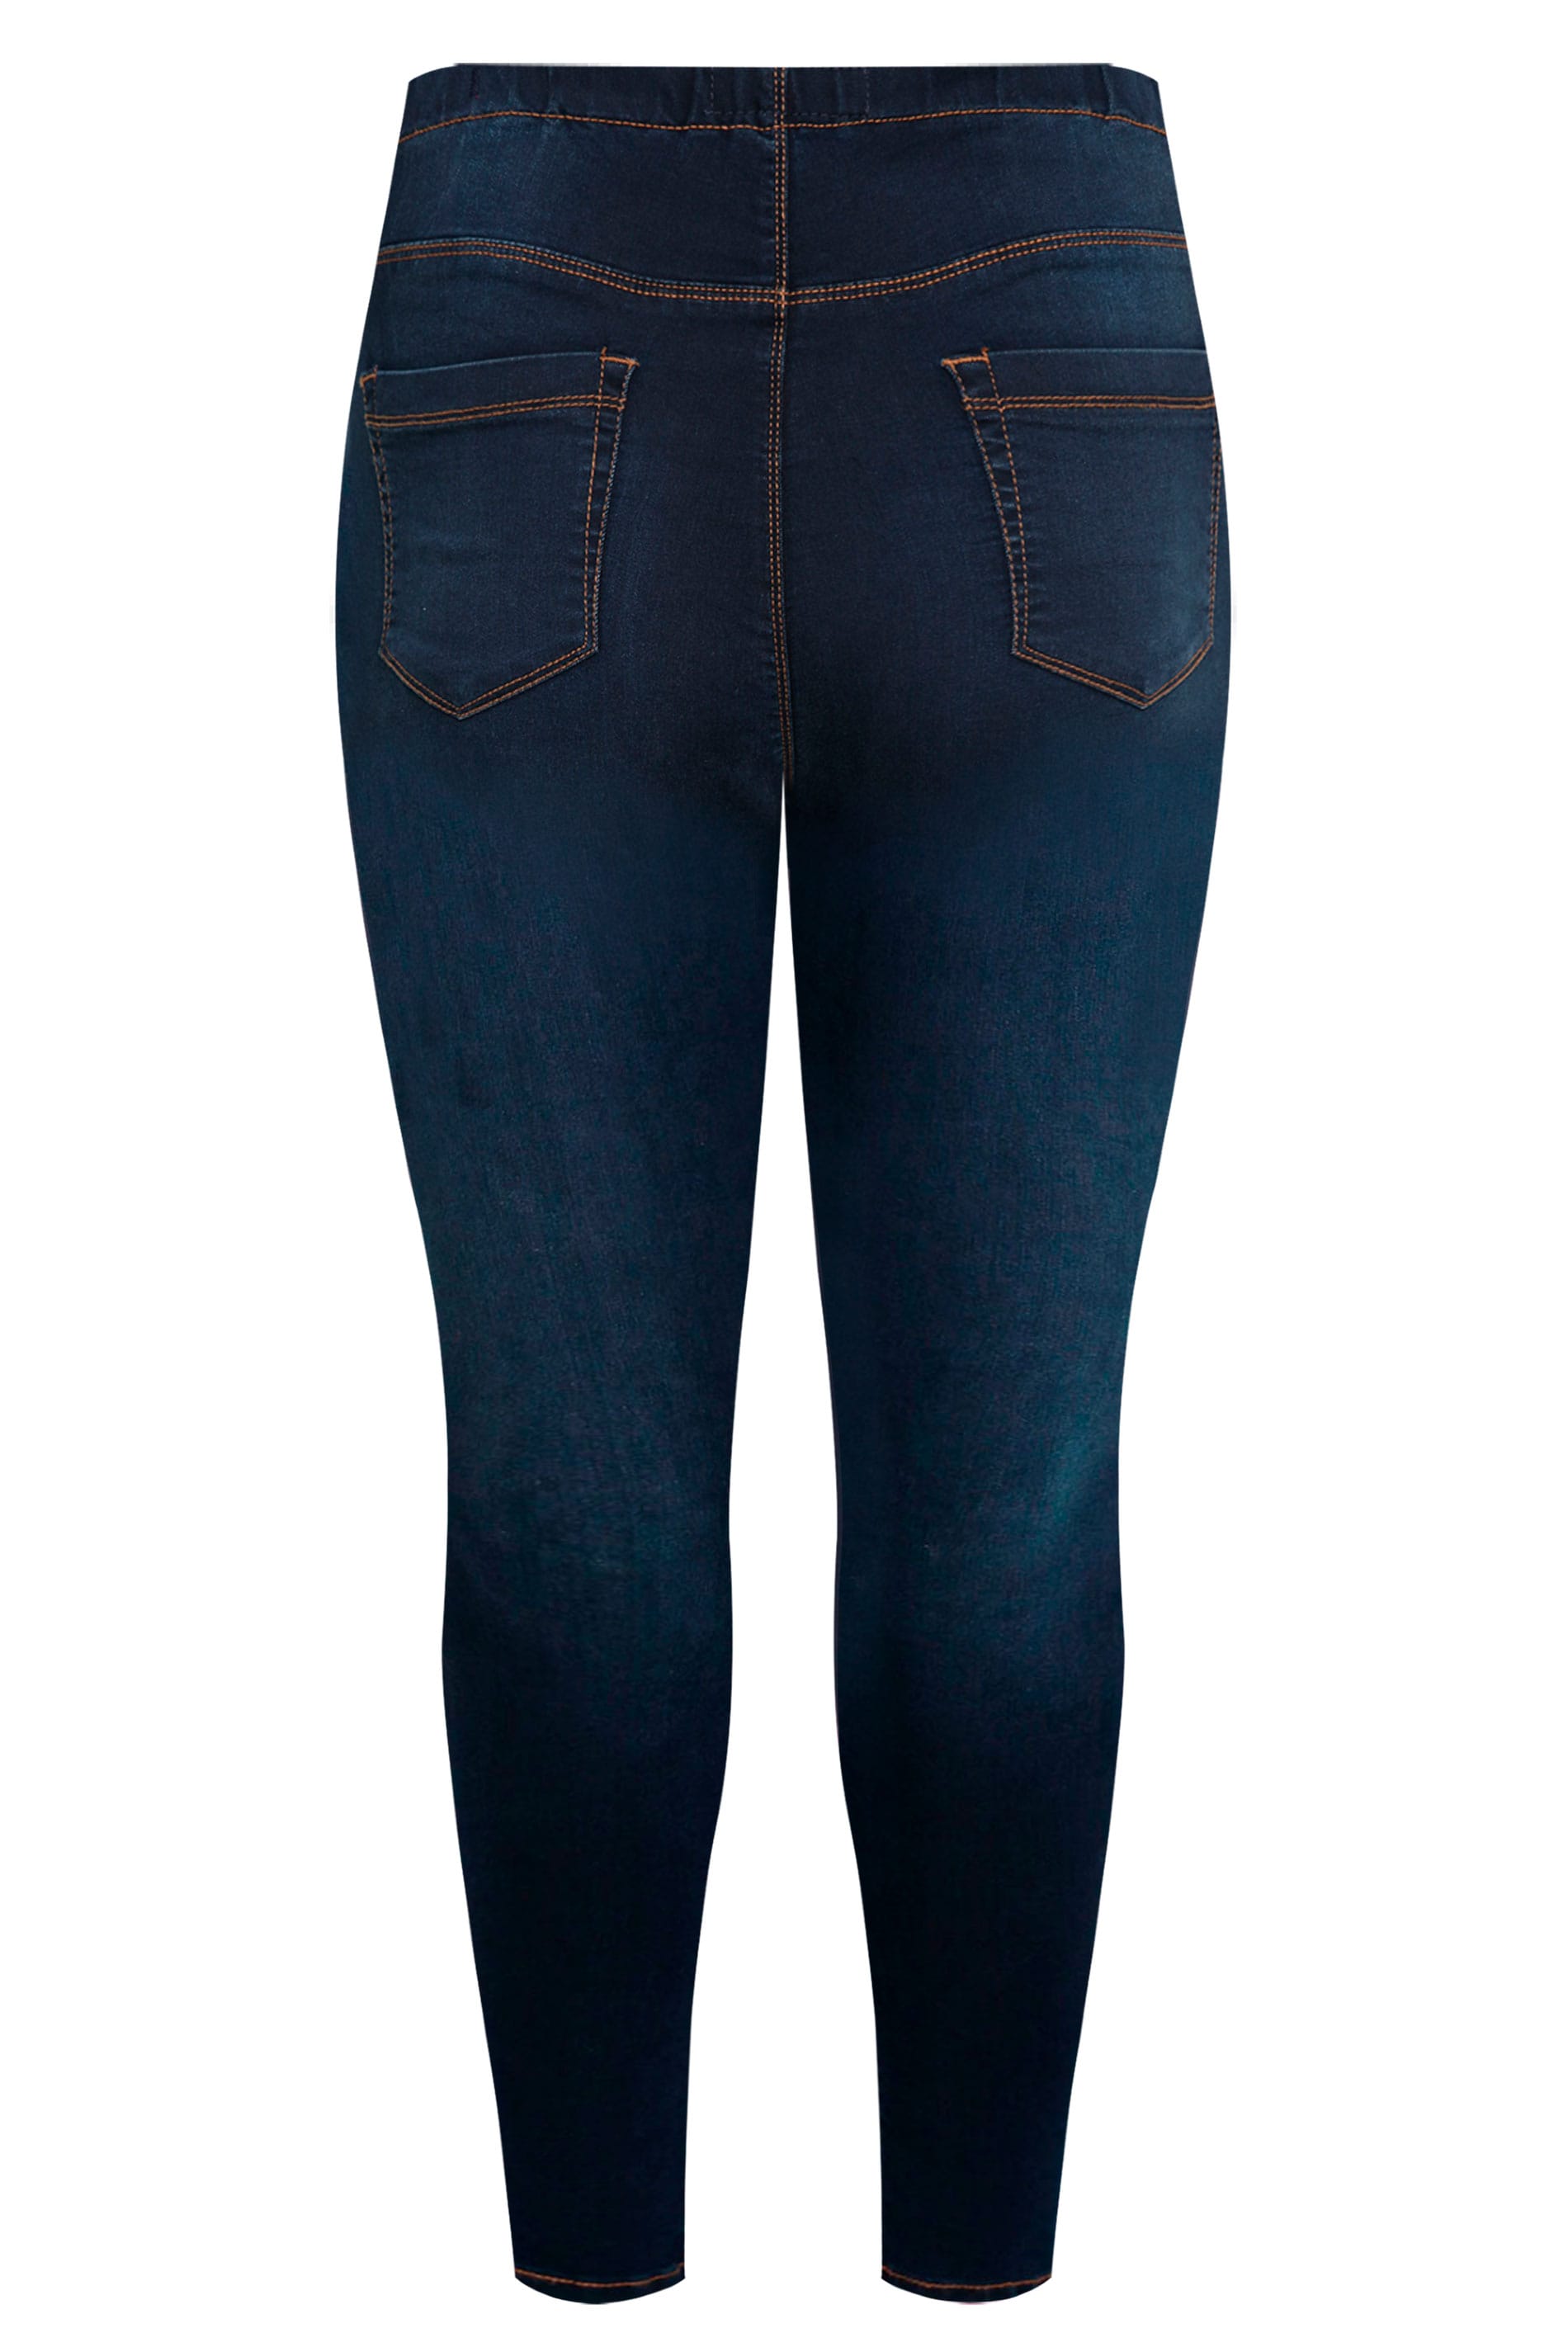 Buy Simply Be Indigo Blue Lottie Wide Leg Jeggings from Next USA